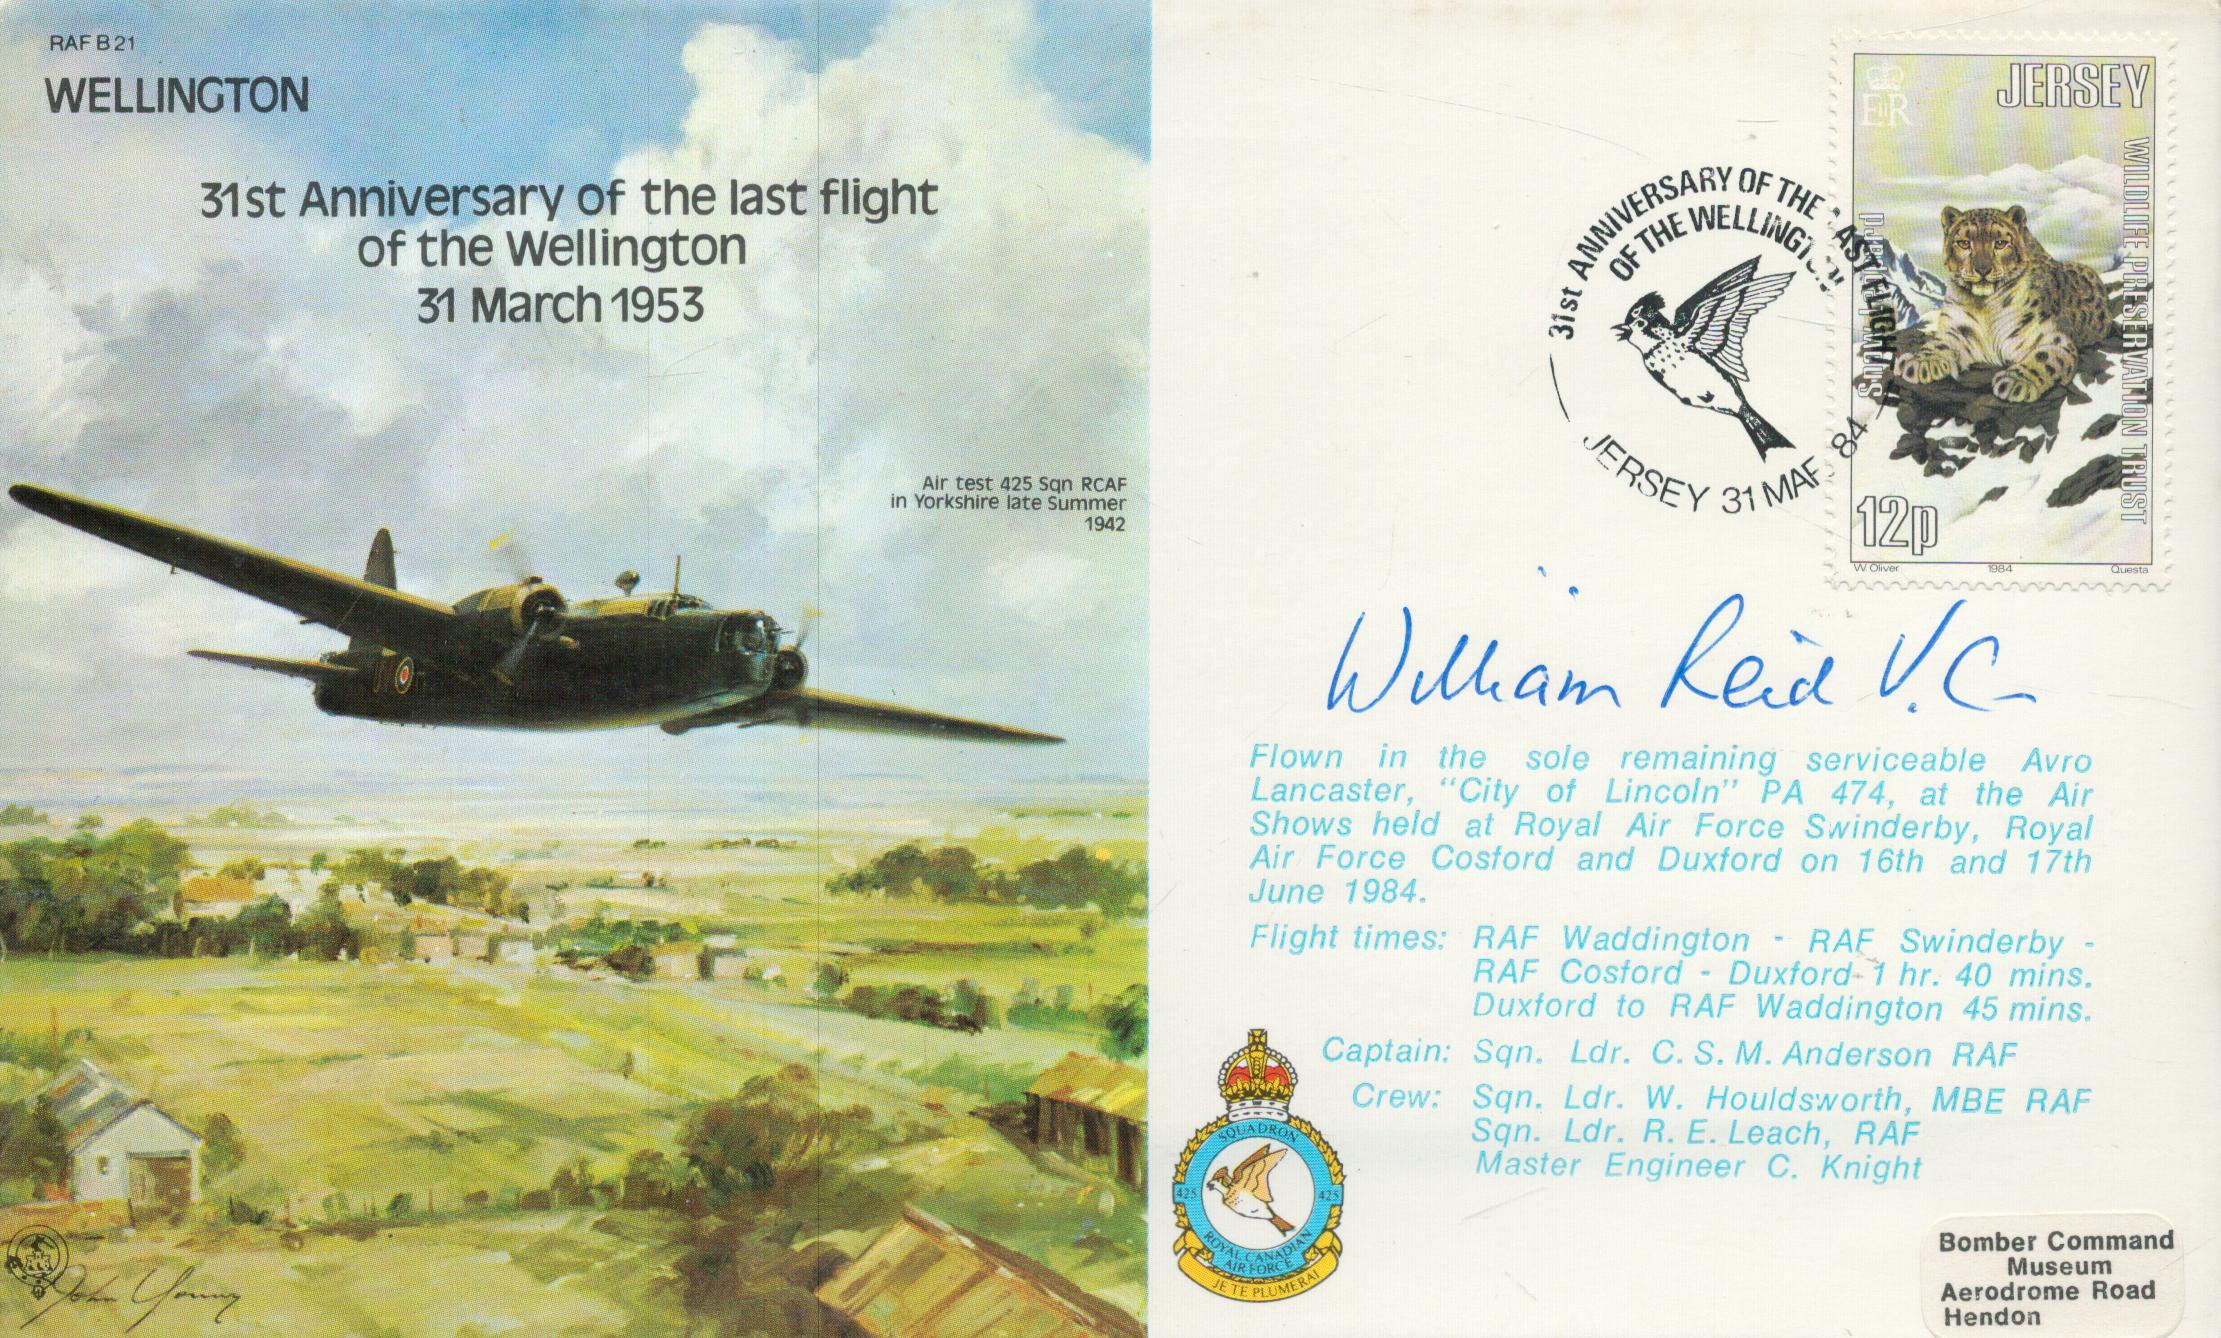 WW2 Bill Reid VC Victoria Cross winner signed Wellington bomber cover. At the age of 22 Reid was